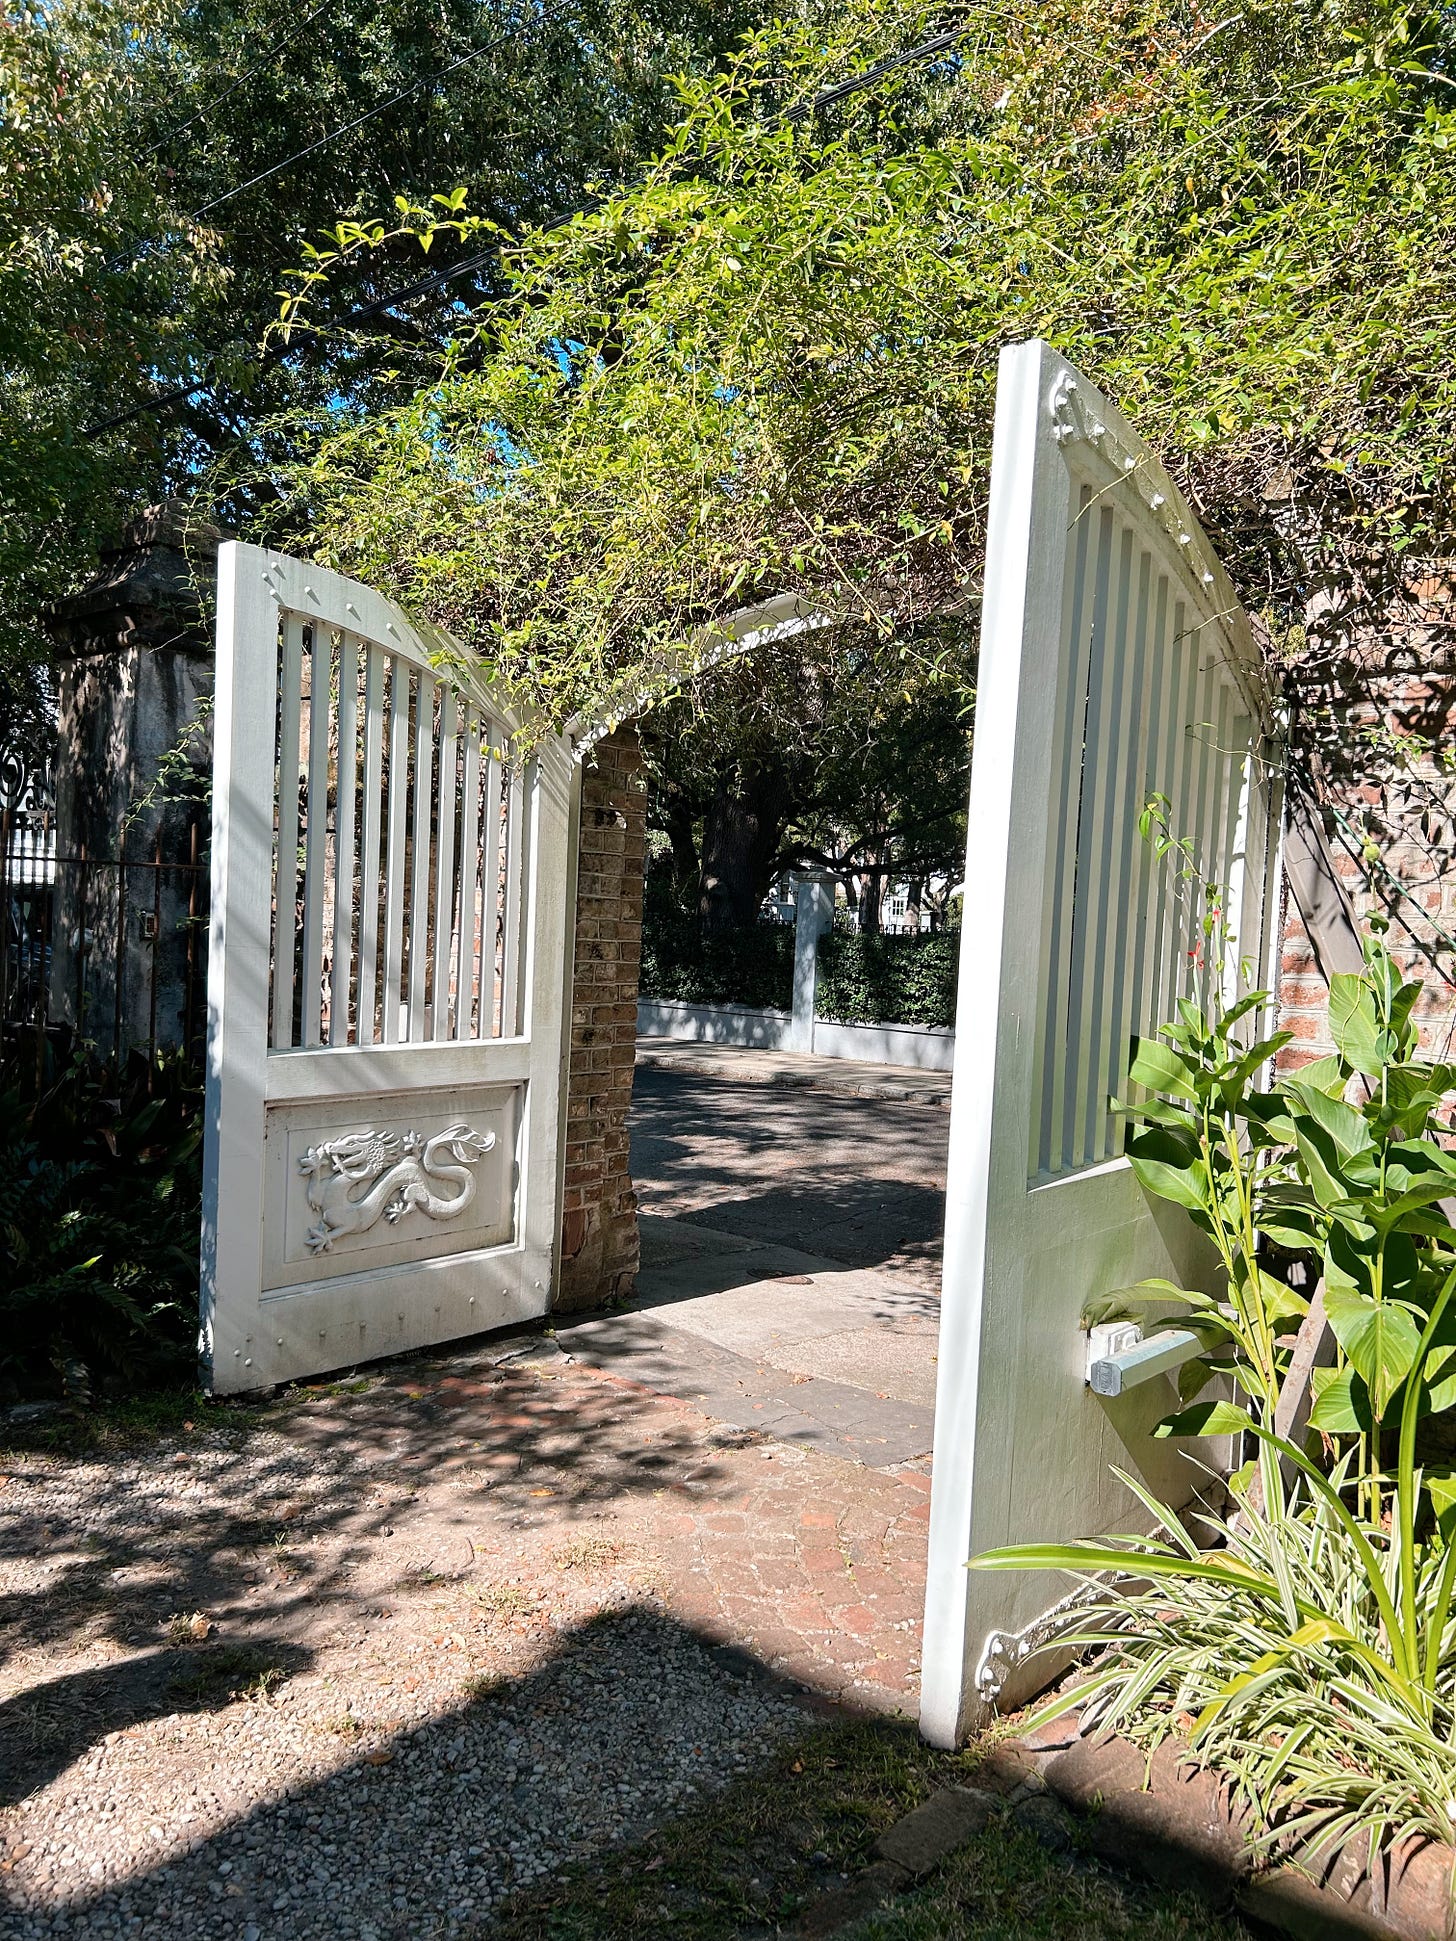 White gates carved with the dragon emblem from the Wheel of Time. Vines and green plants surround and shade the driveway.